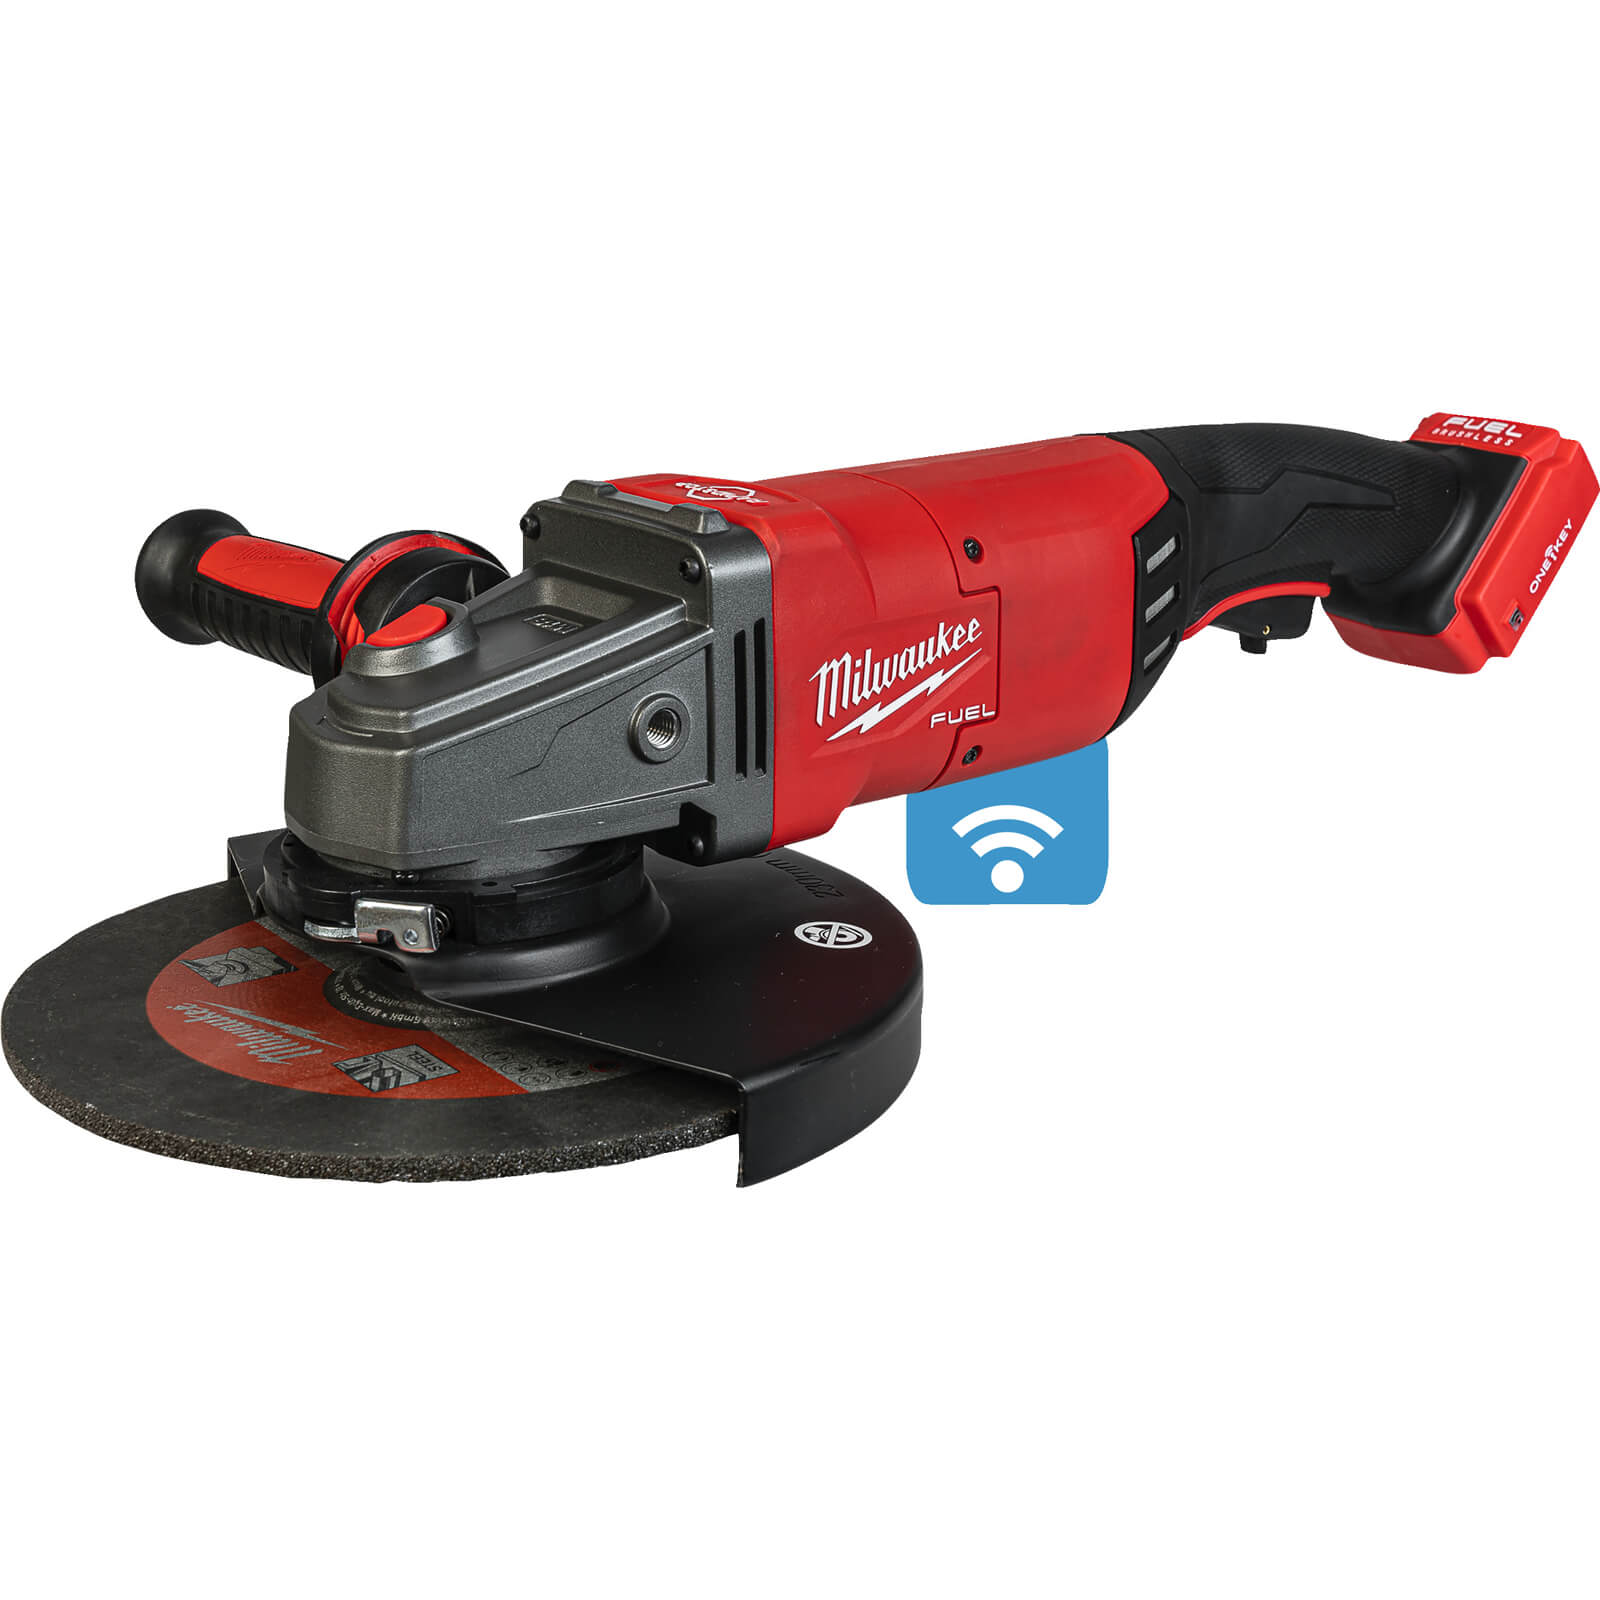 Image of Milwaukee M18 ONEFLAG230XPDB Fuel 18v Cordless Brushless Angle Grinder 230mm No Batteries No Charger Case